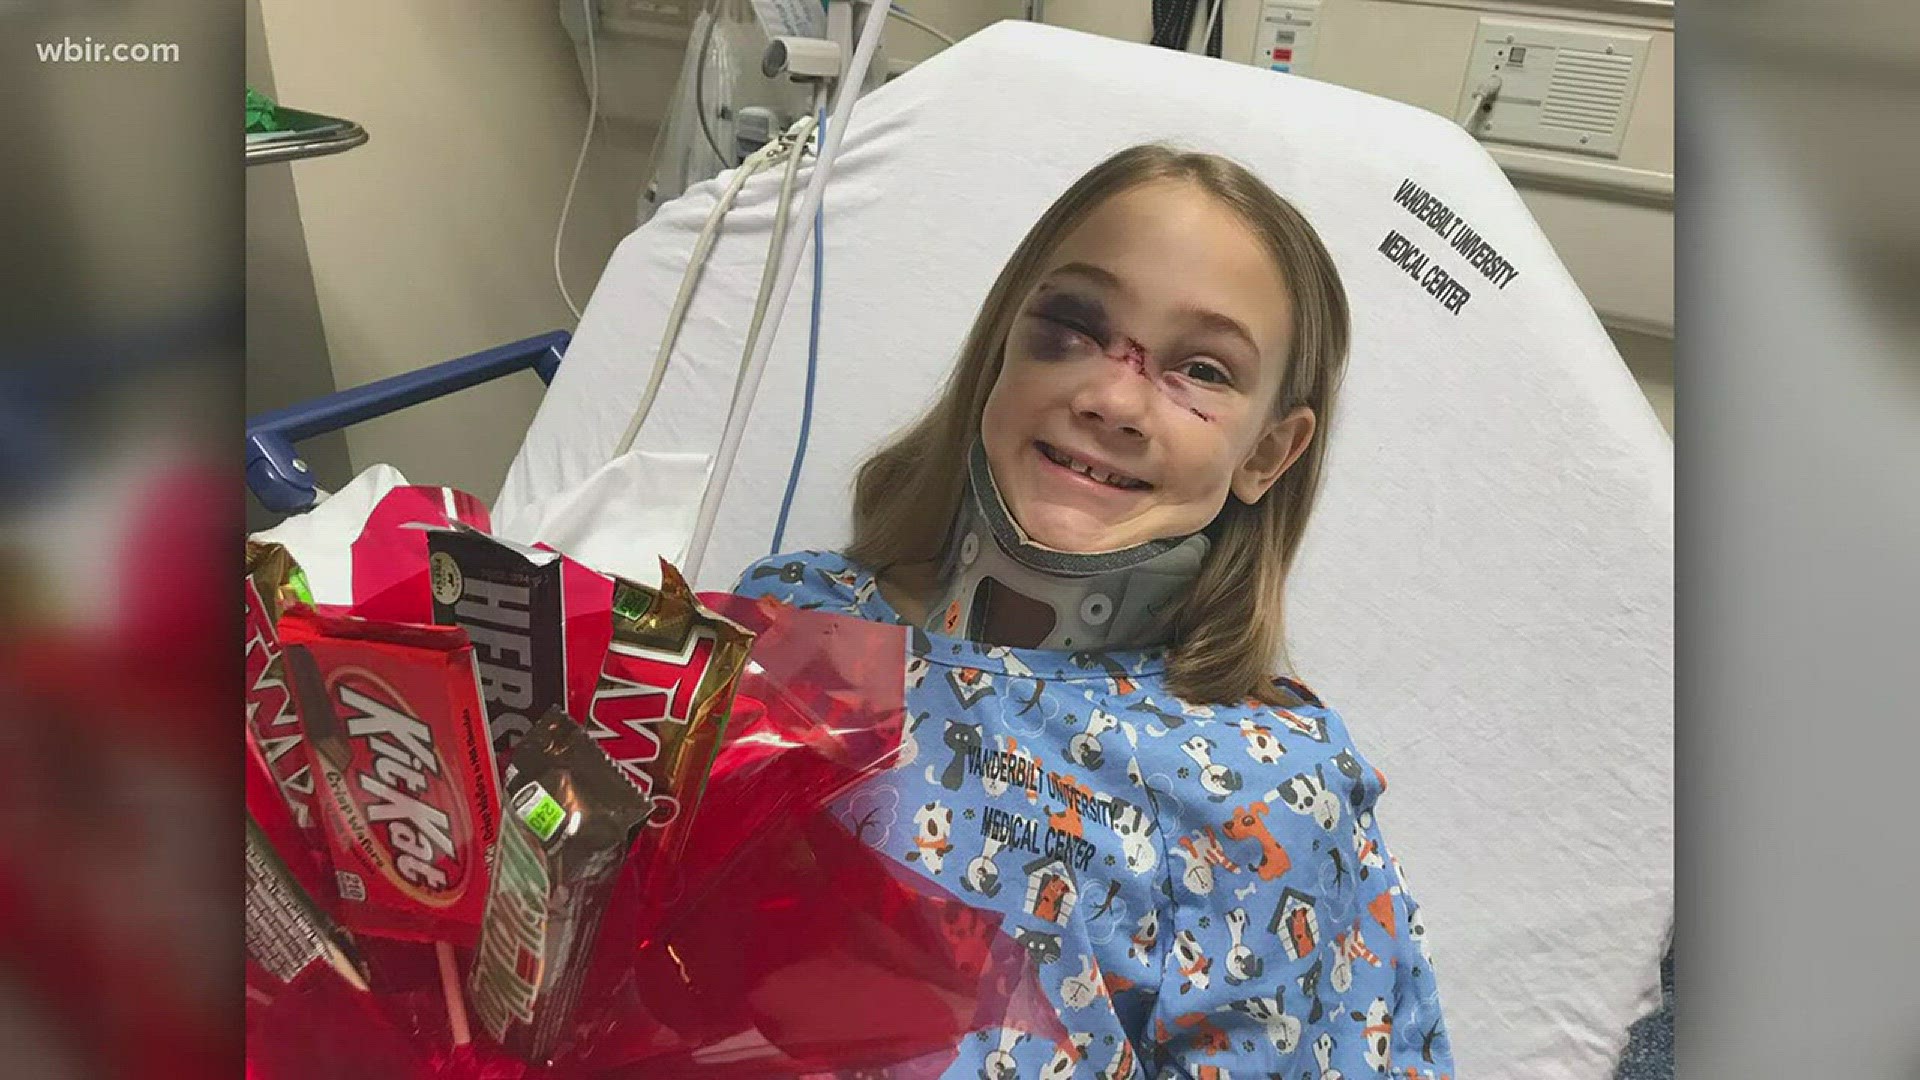 A 10-year-old girl is recovering at Vanderbilt hospital after a freak accident caused her to get a rare infection. But that's just the beginning of her story.